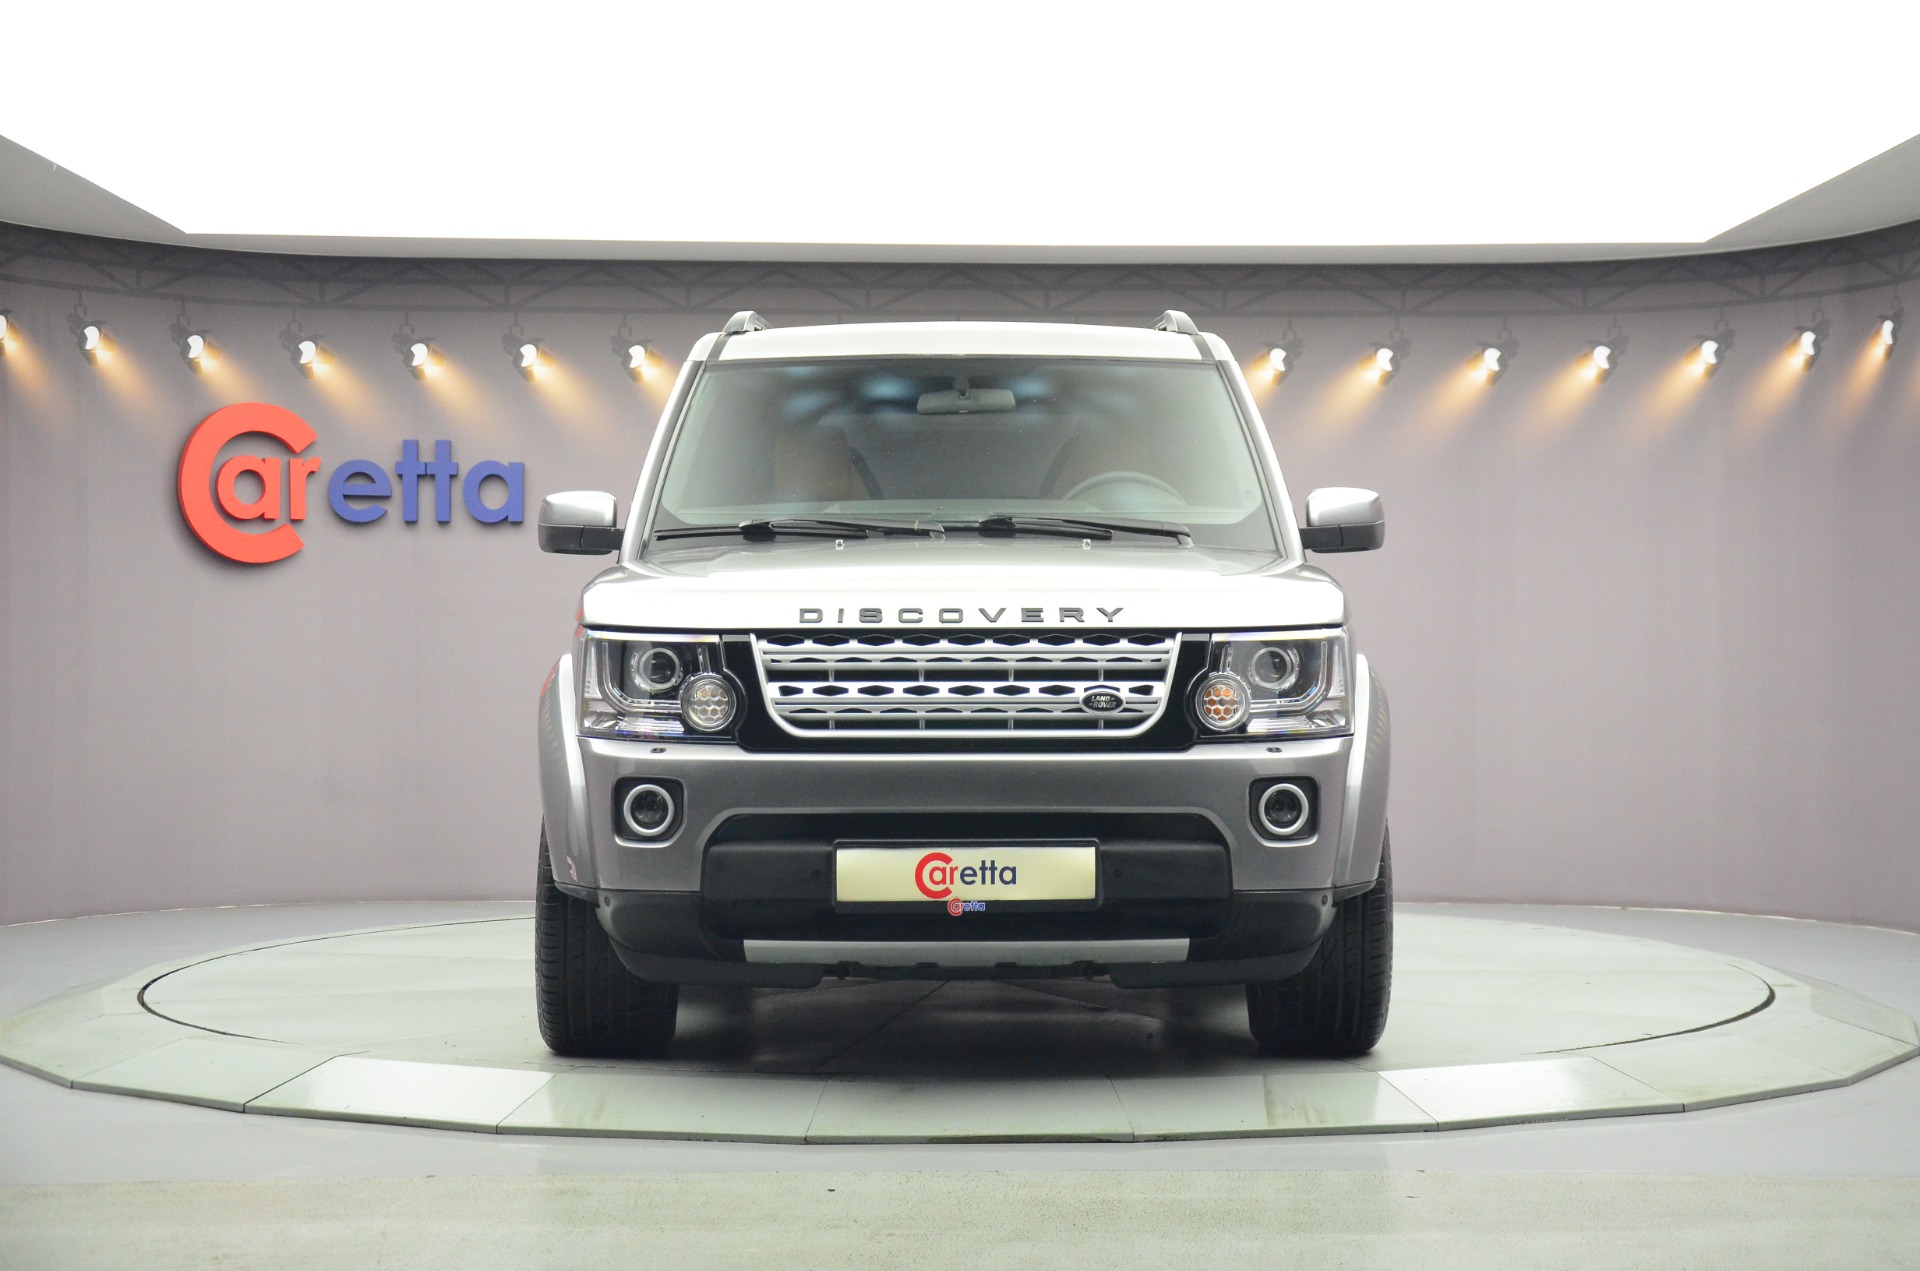 2008 Model Land Rover Discovery 2.7 TDV6-1